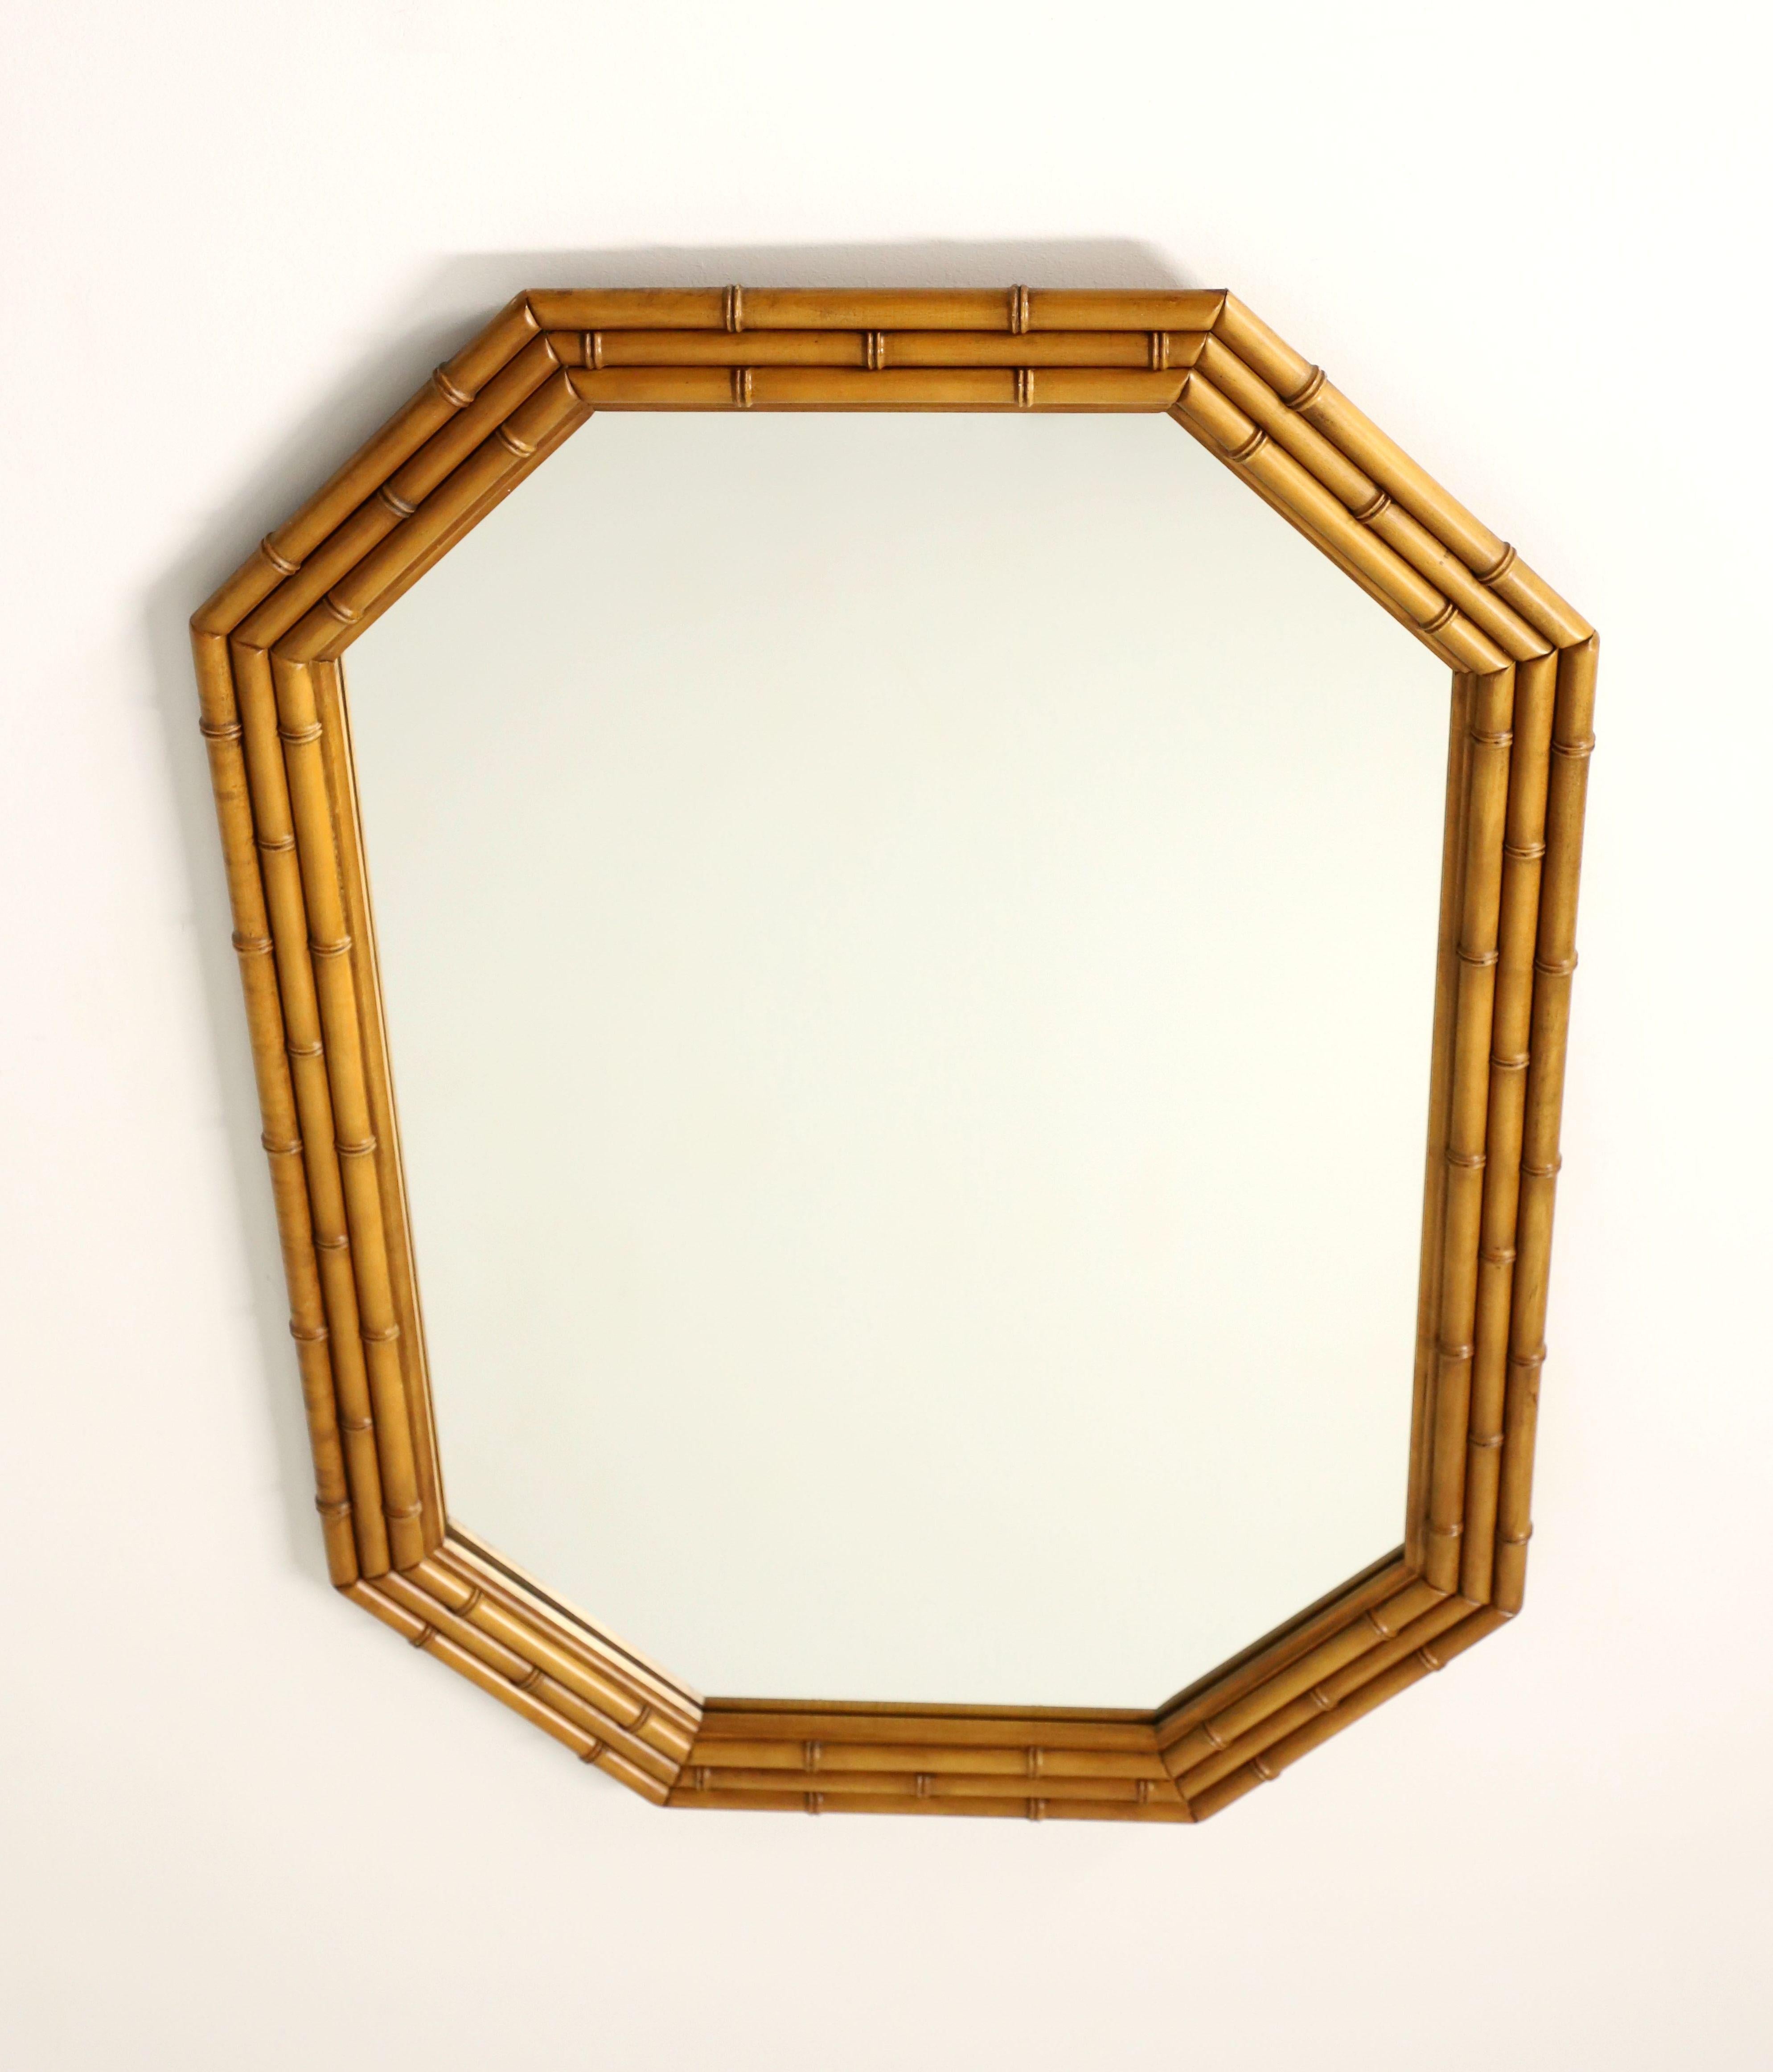 An Asian style wall mirror by Lenoir Mirror for Thomasville. Mirror glass in a light brown wood tone faux bamboo frame. Features an octagonal shape with faux bamboo detail to the frame. Made in Lenoir, North Carolina, USA, in the late 20th